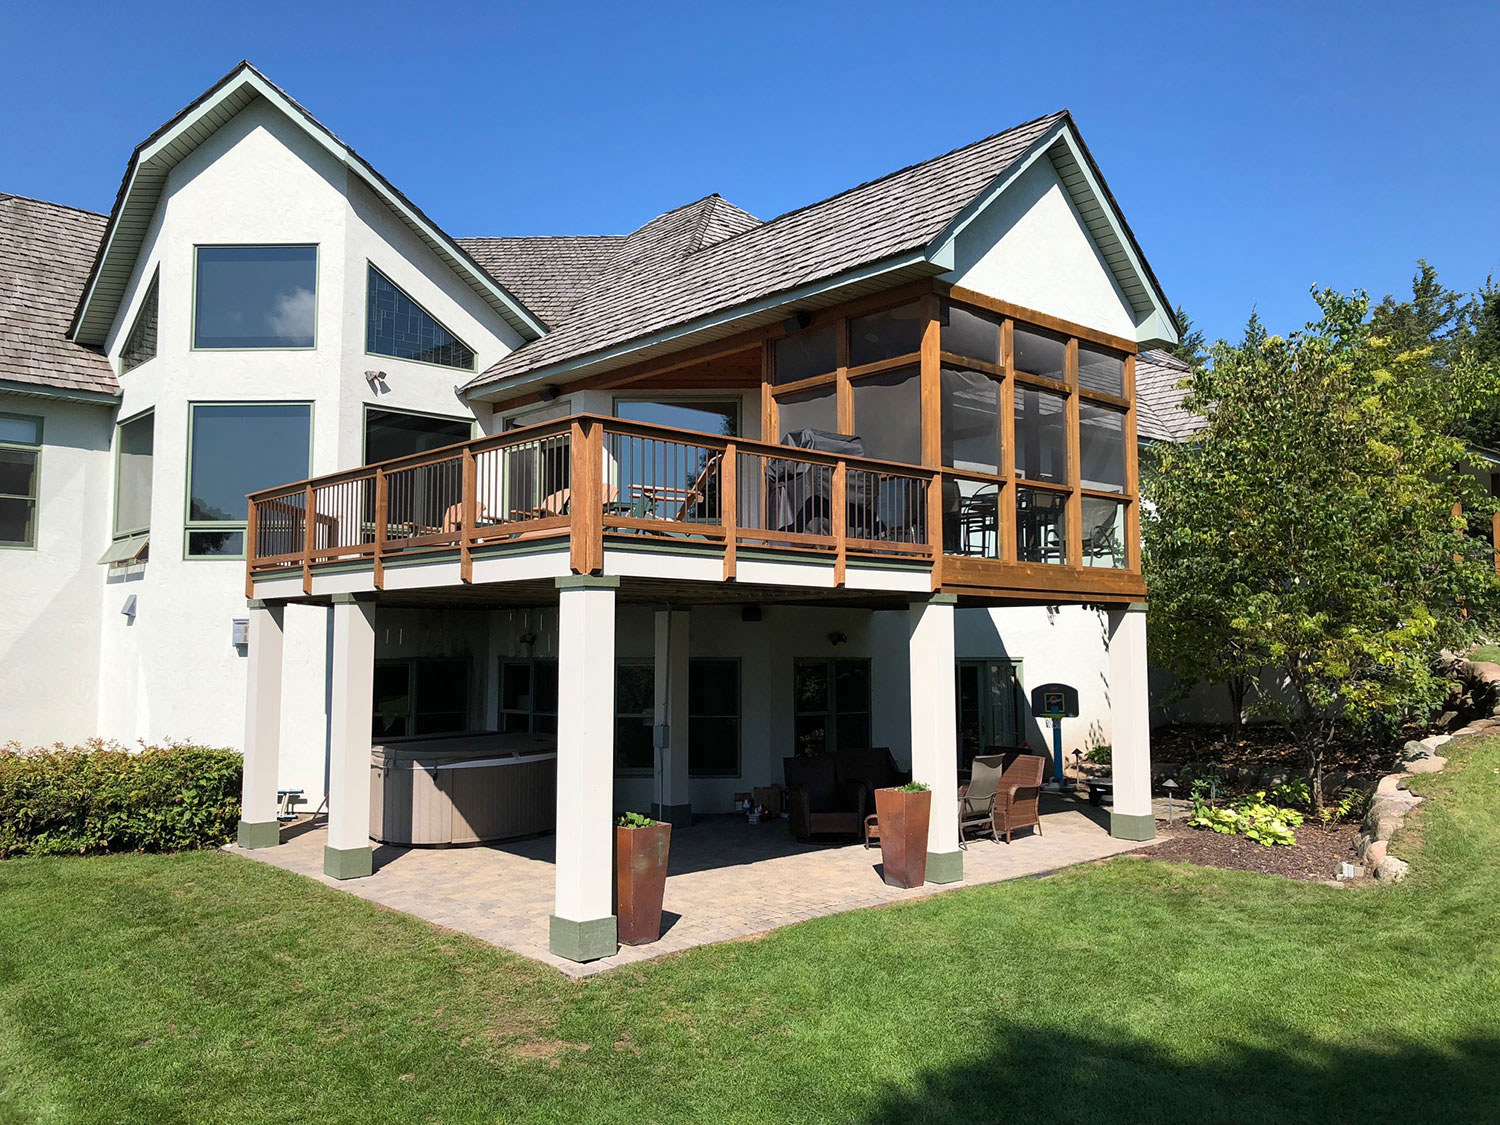 custom deck & porch builder in St. Paul. Wood framed porch addition with attached deck, built by Carter Custom Construction.